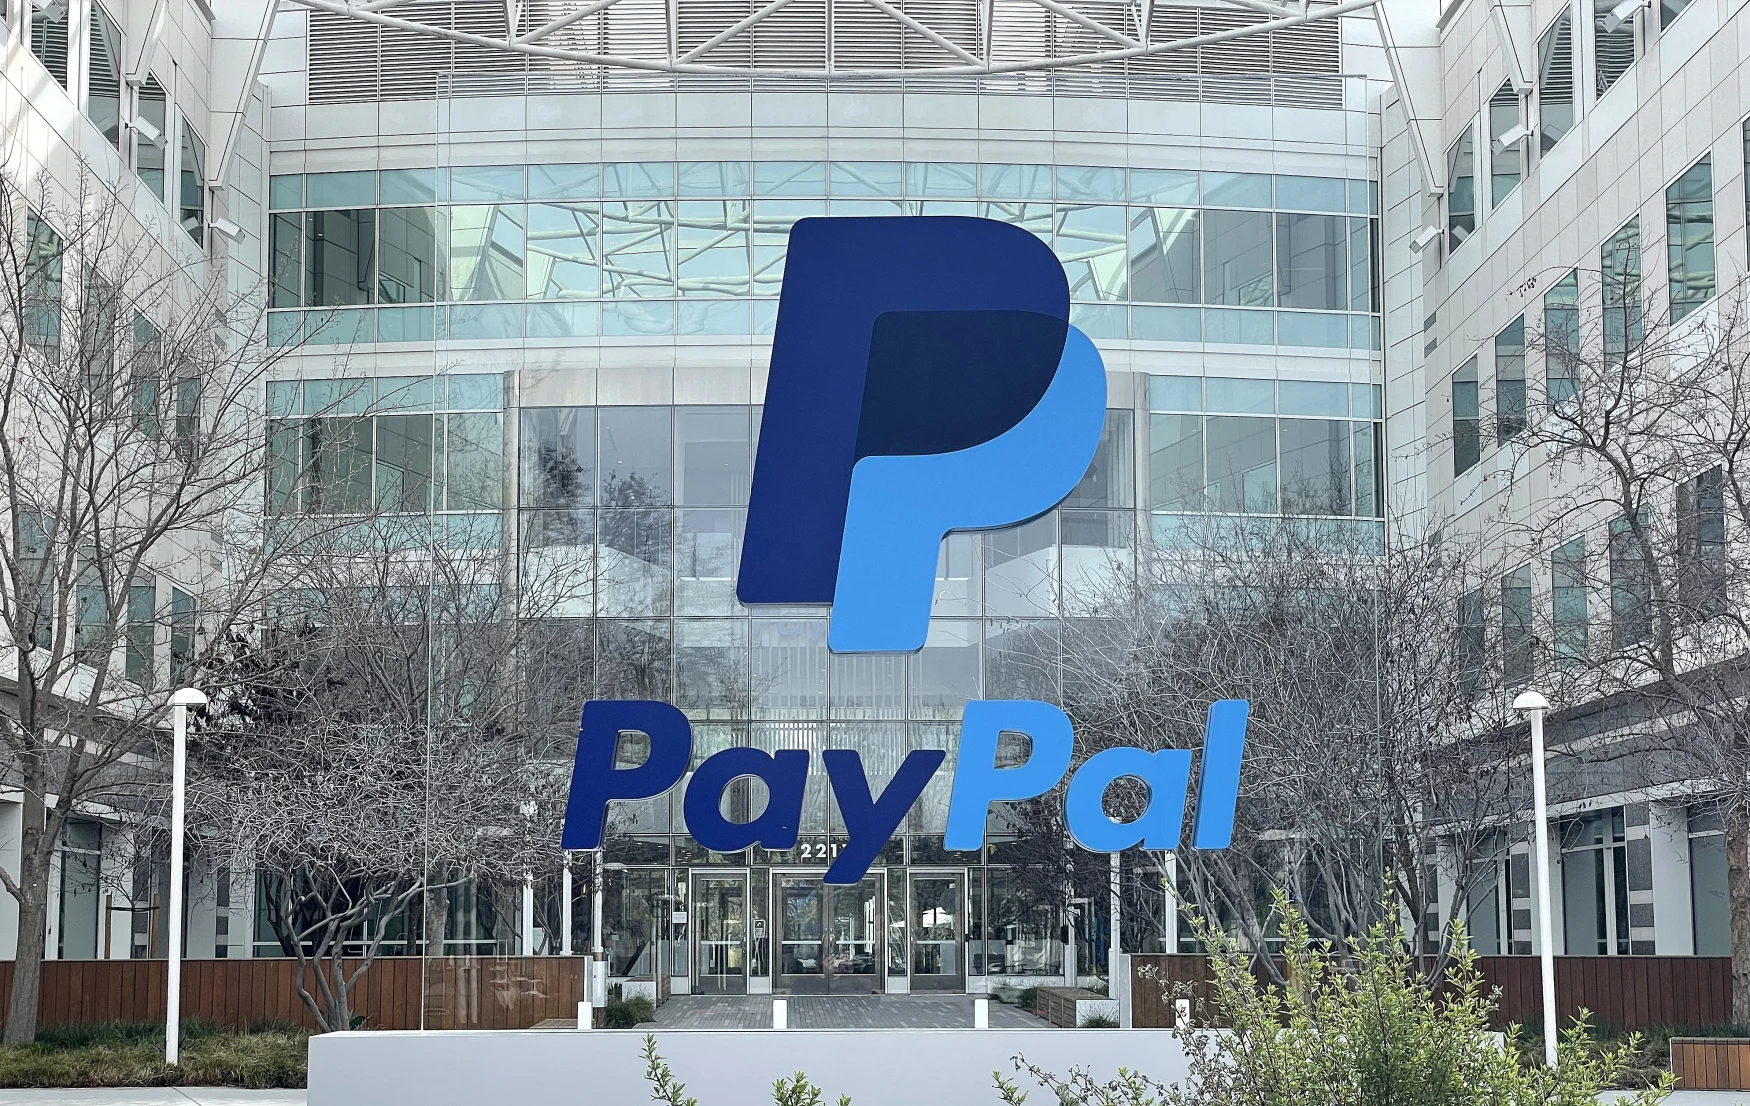 SAN JOSE, CALIFORNIA - FEBRUARY 02: A sign is posted in front of PayPal headquarters on February 02, 2023 in San Jose, California. PayPal has announced plans to lay off 2,000 employees, nearly 7 percent of its workforce. (Photo by Justin Sullivan/Getty Images)